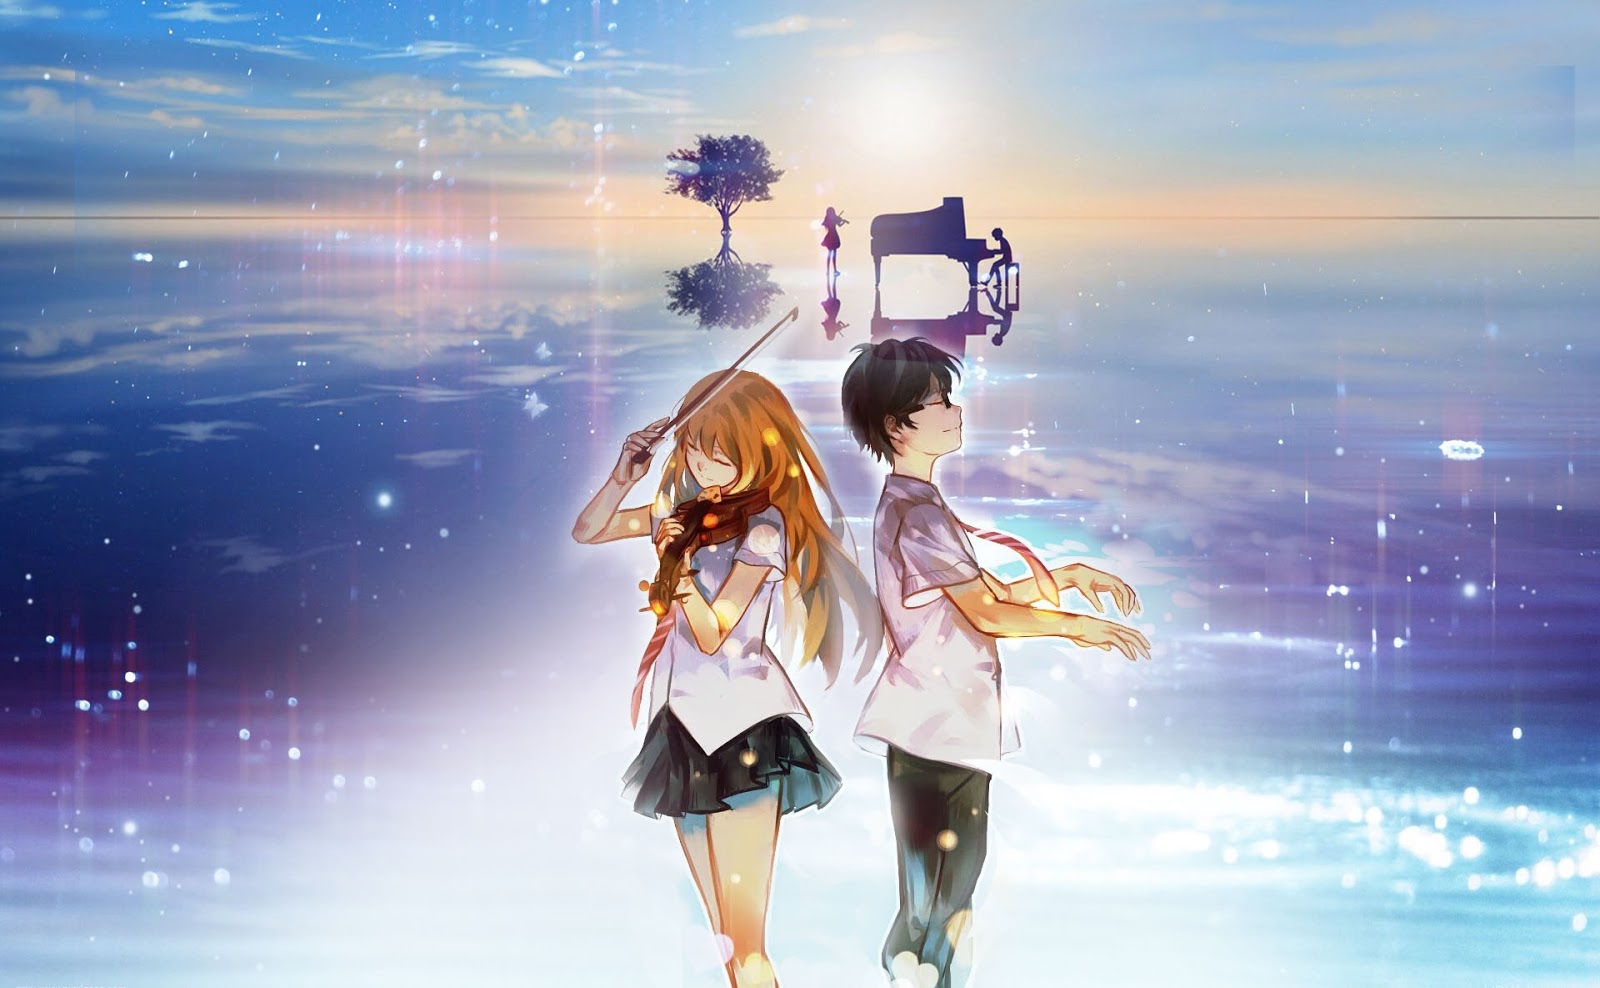 Your Lie In April Wallpapers on